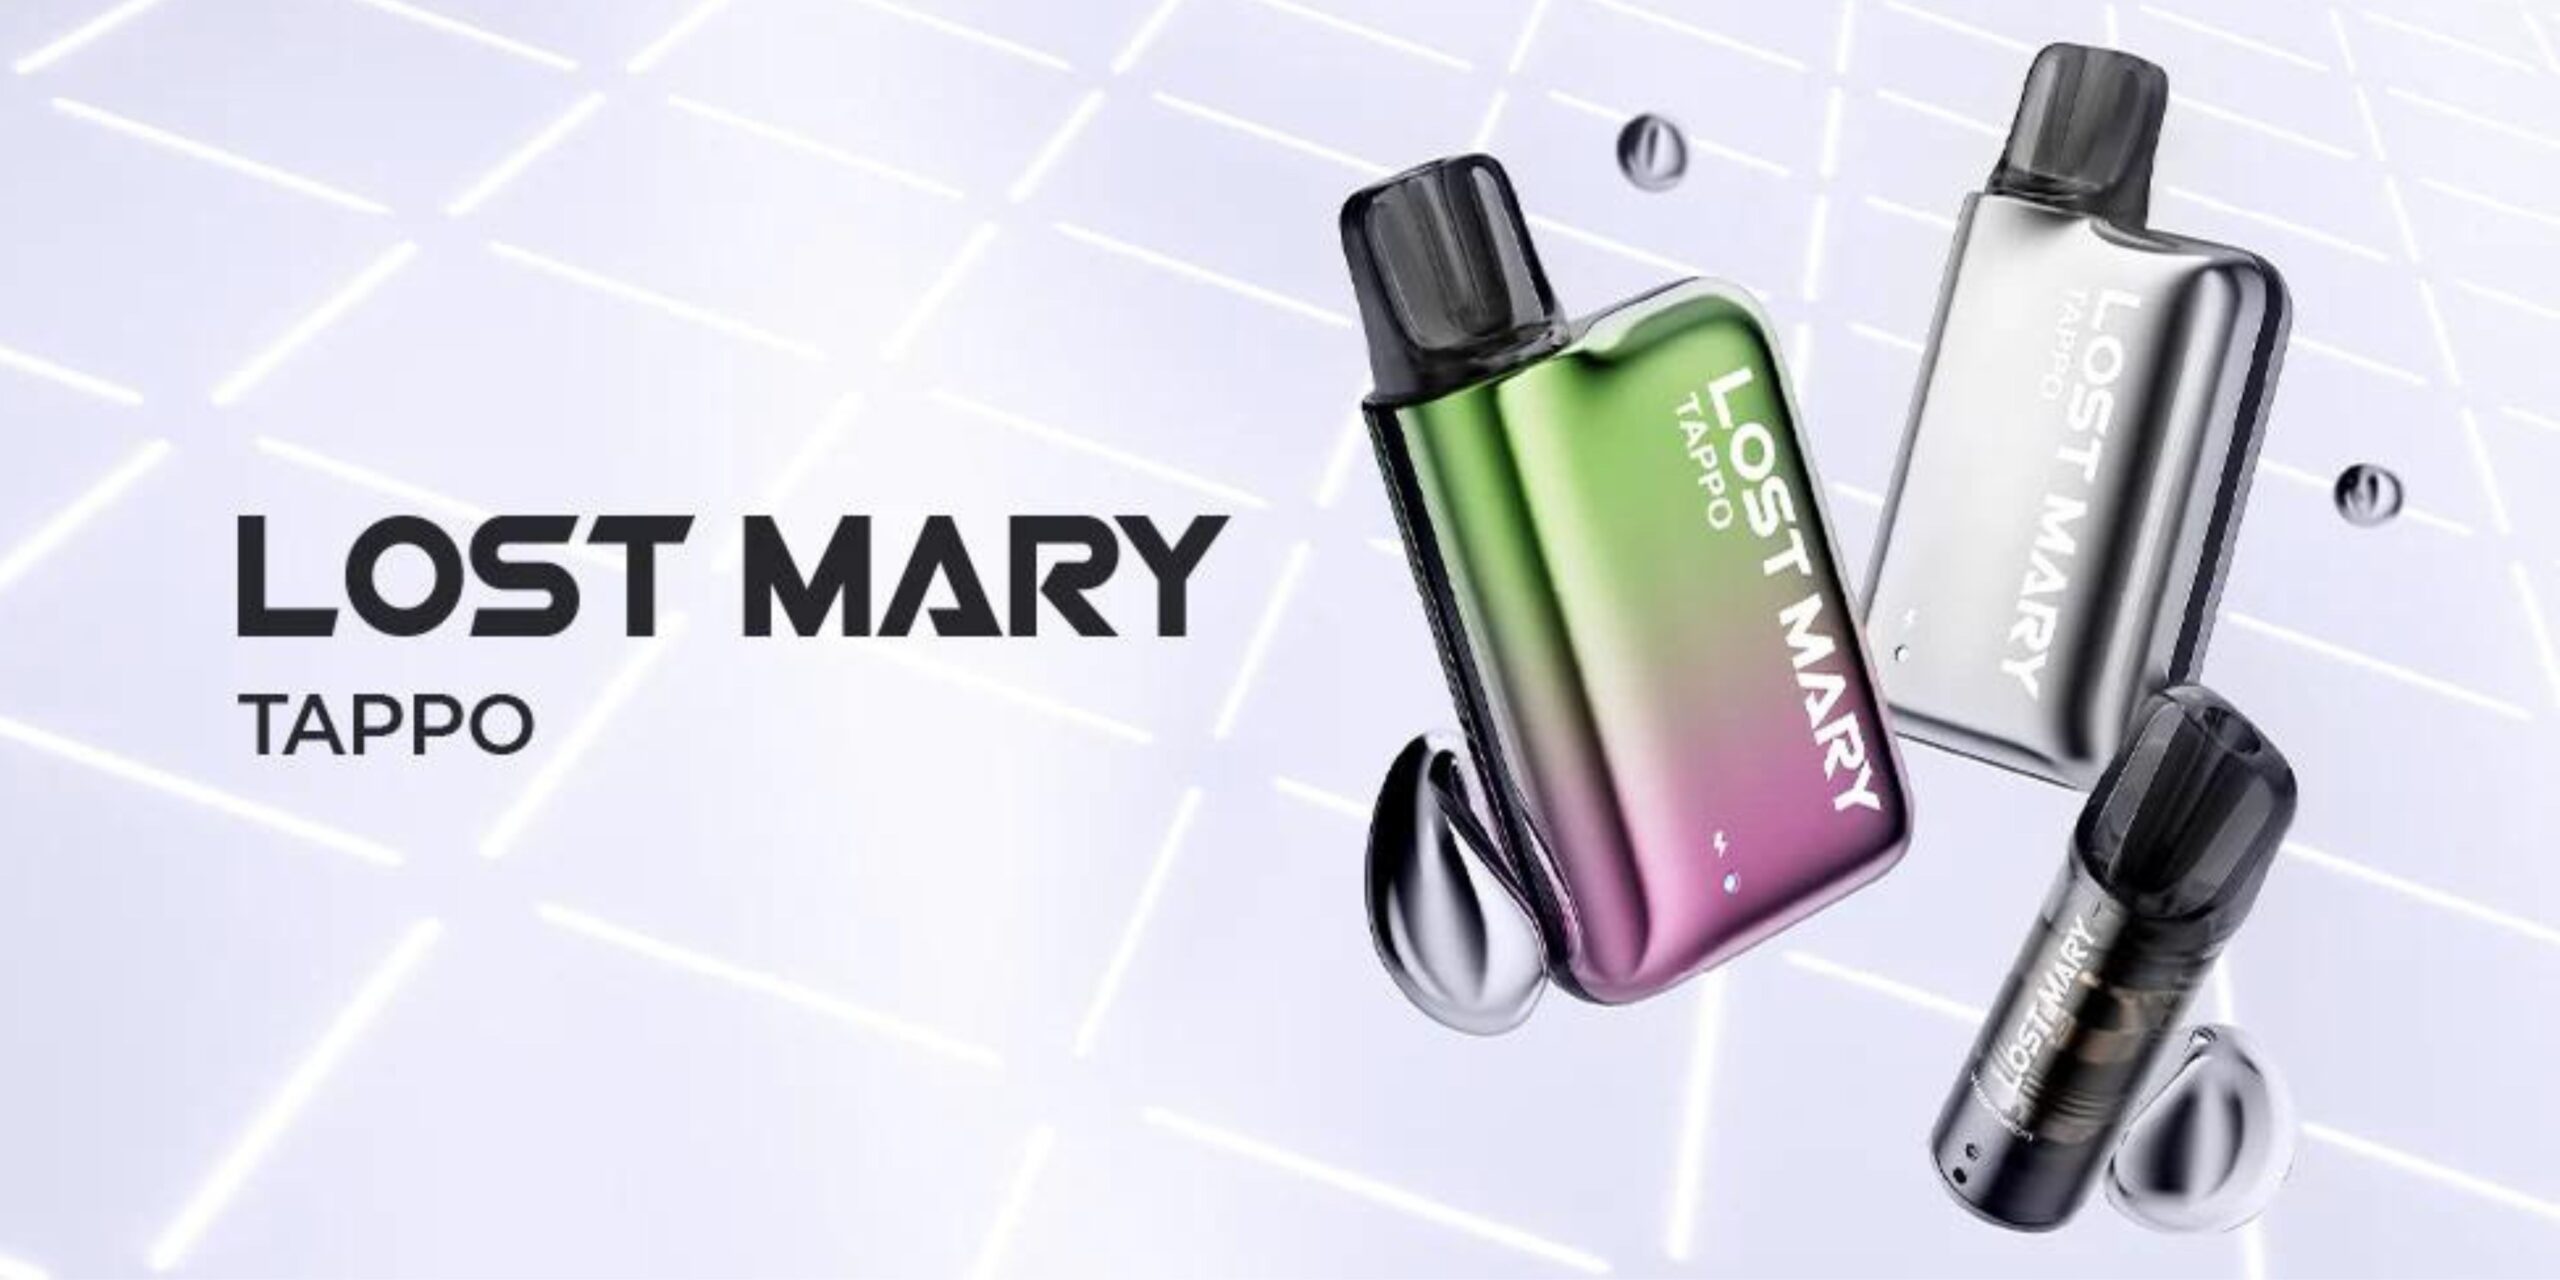 LOST MARY TAPPO – Peach Ice (Replacement Prefilled Pods) VAPING - XMANIA Ireland 15